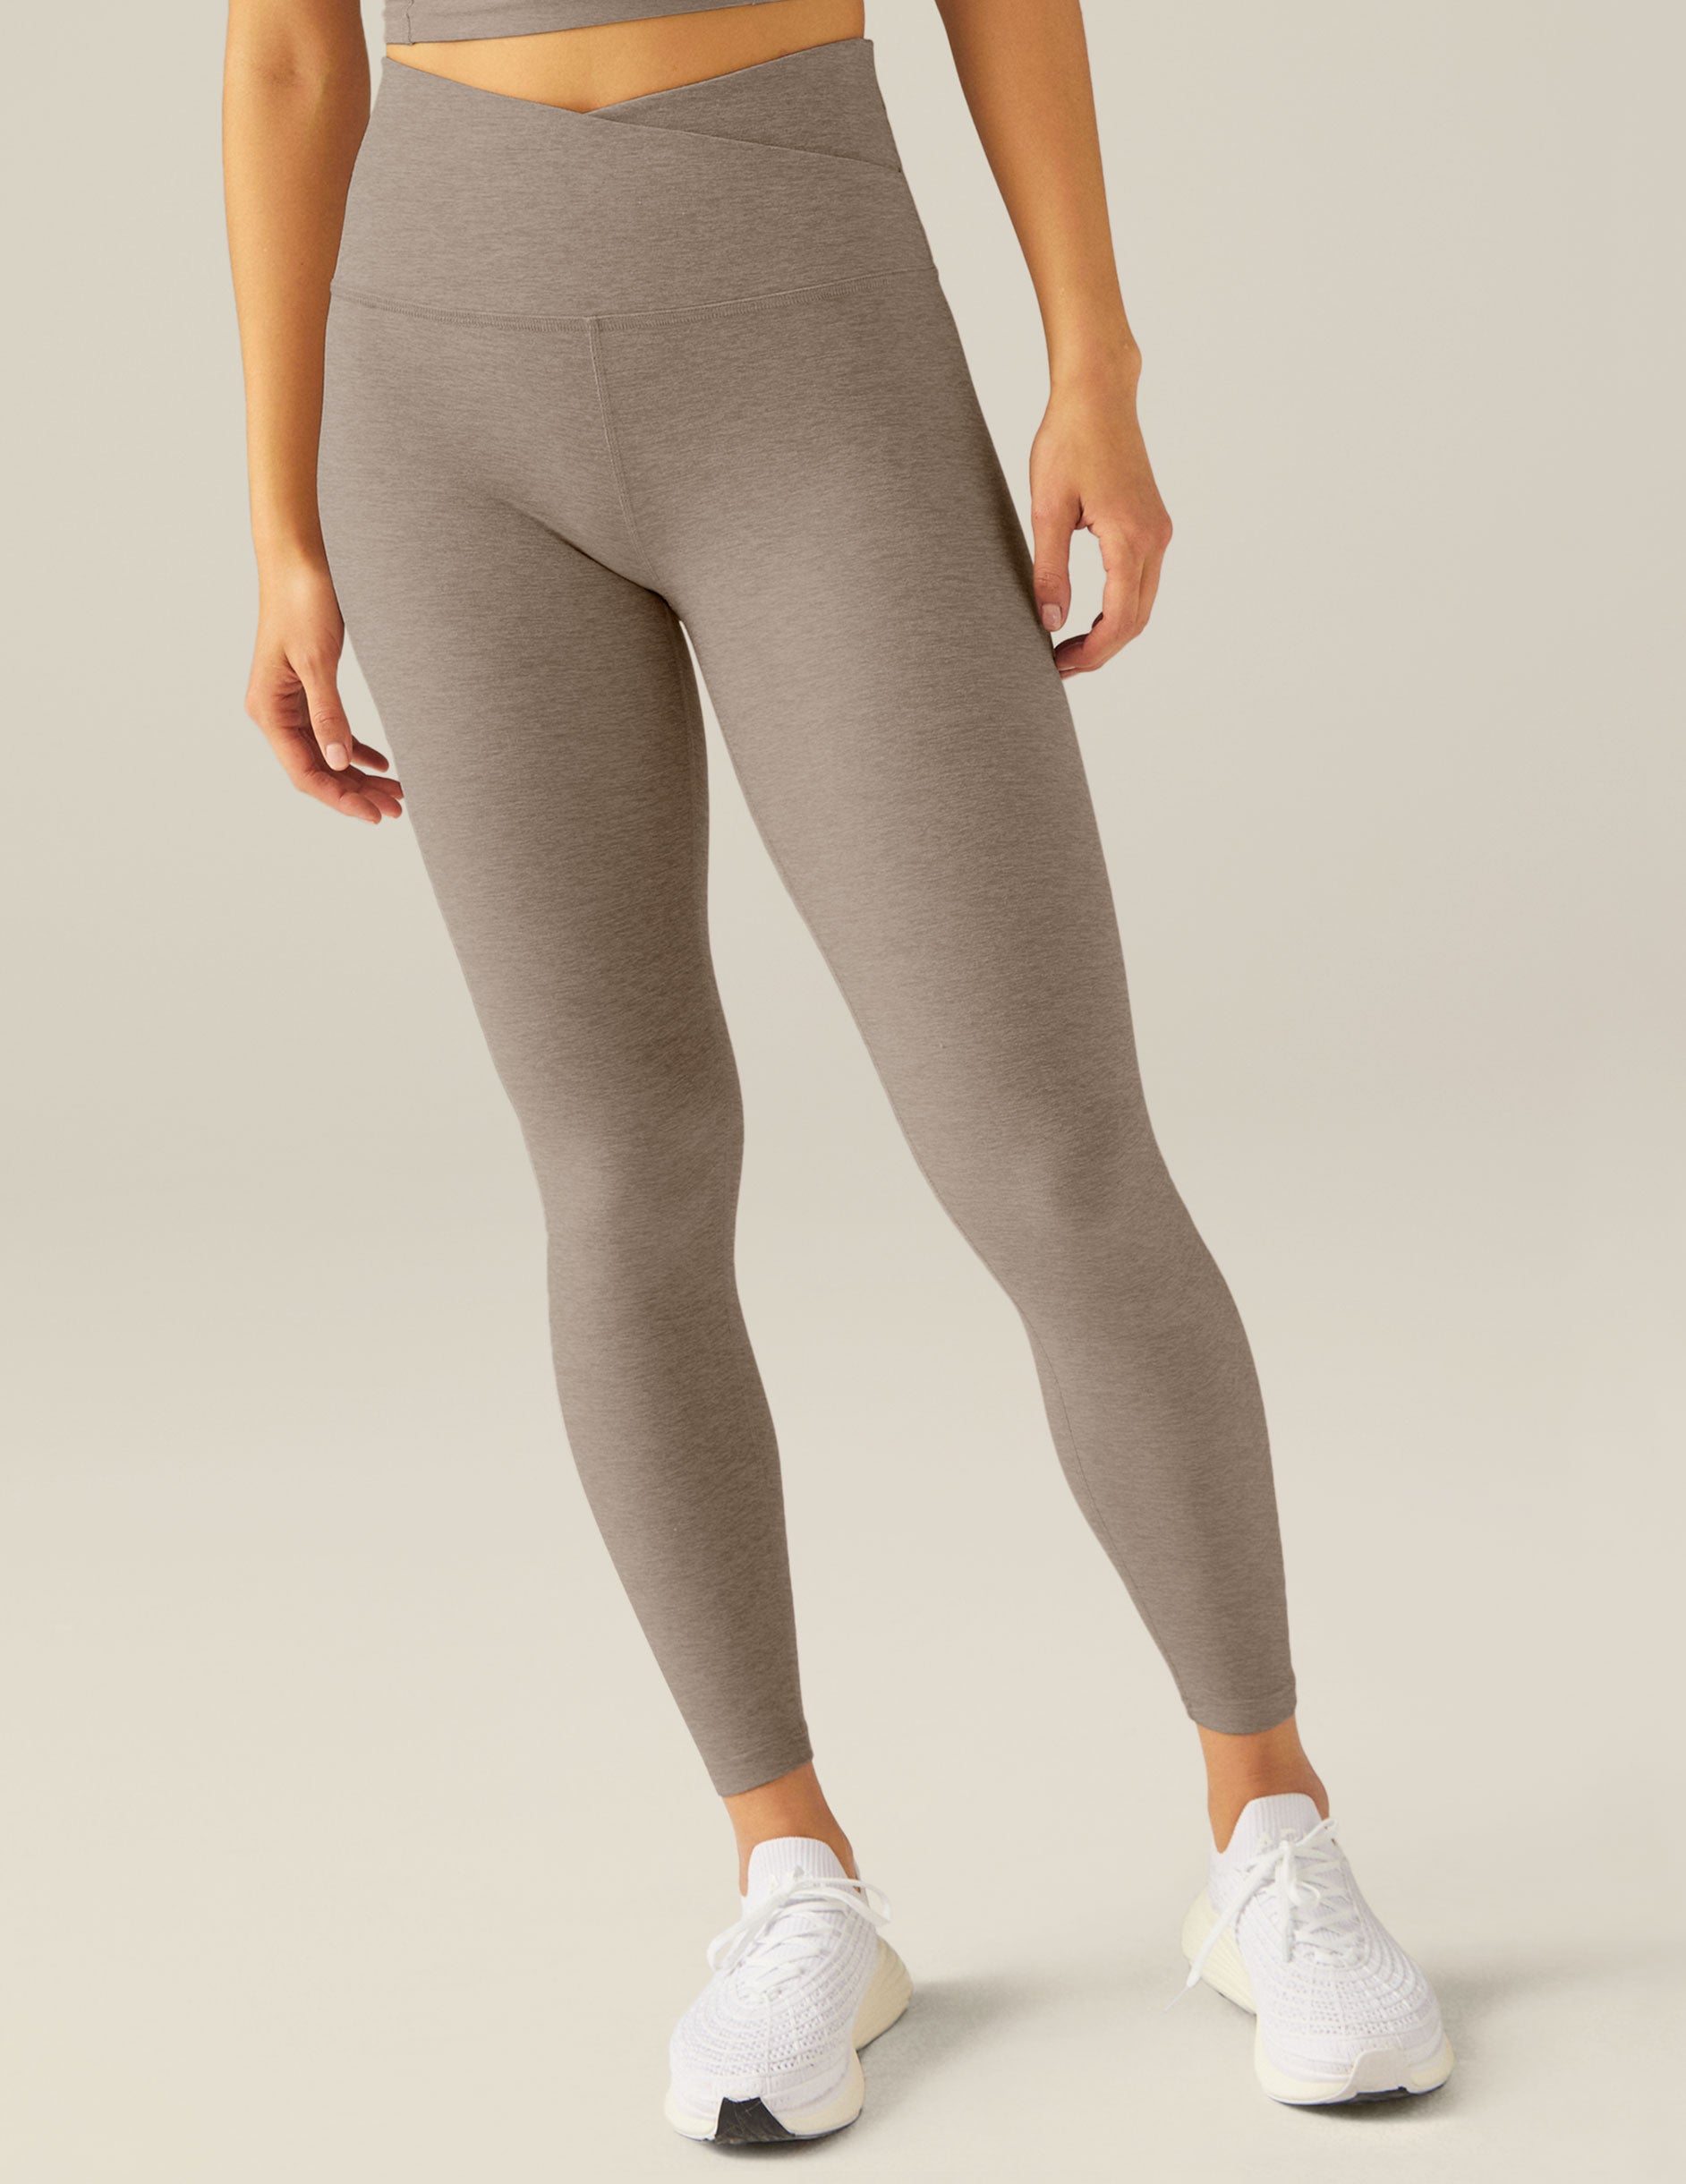 brown high-waisted midi leggings with a front crossover waistband. 